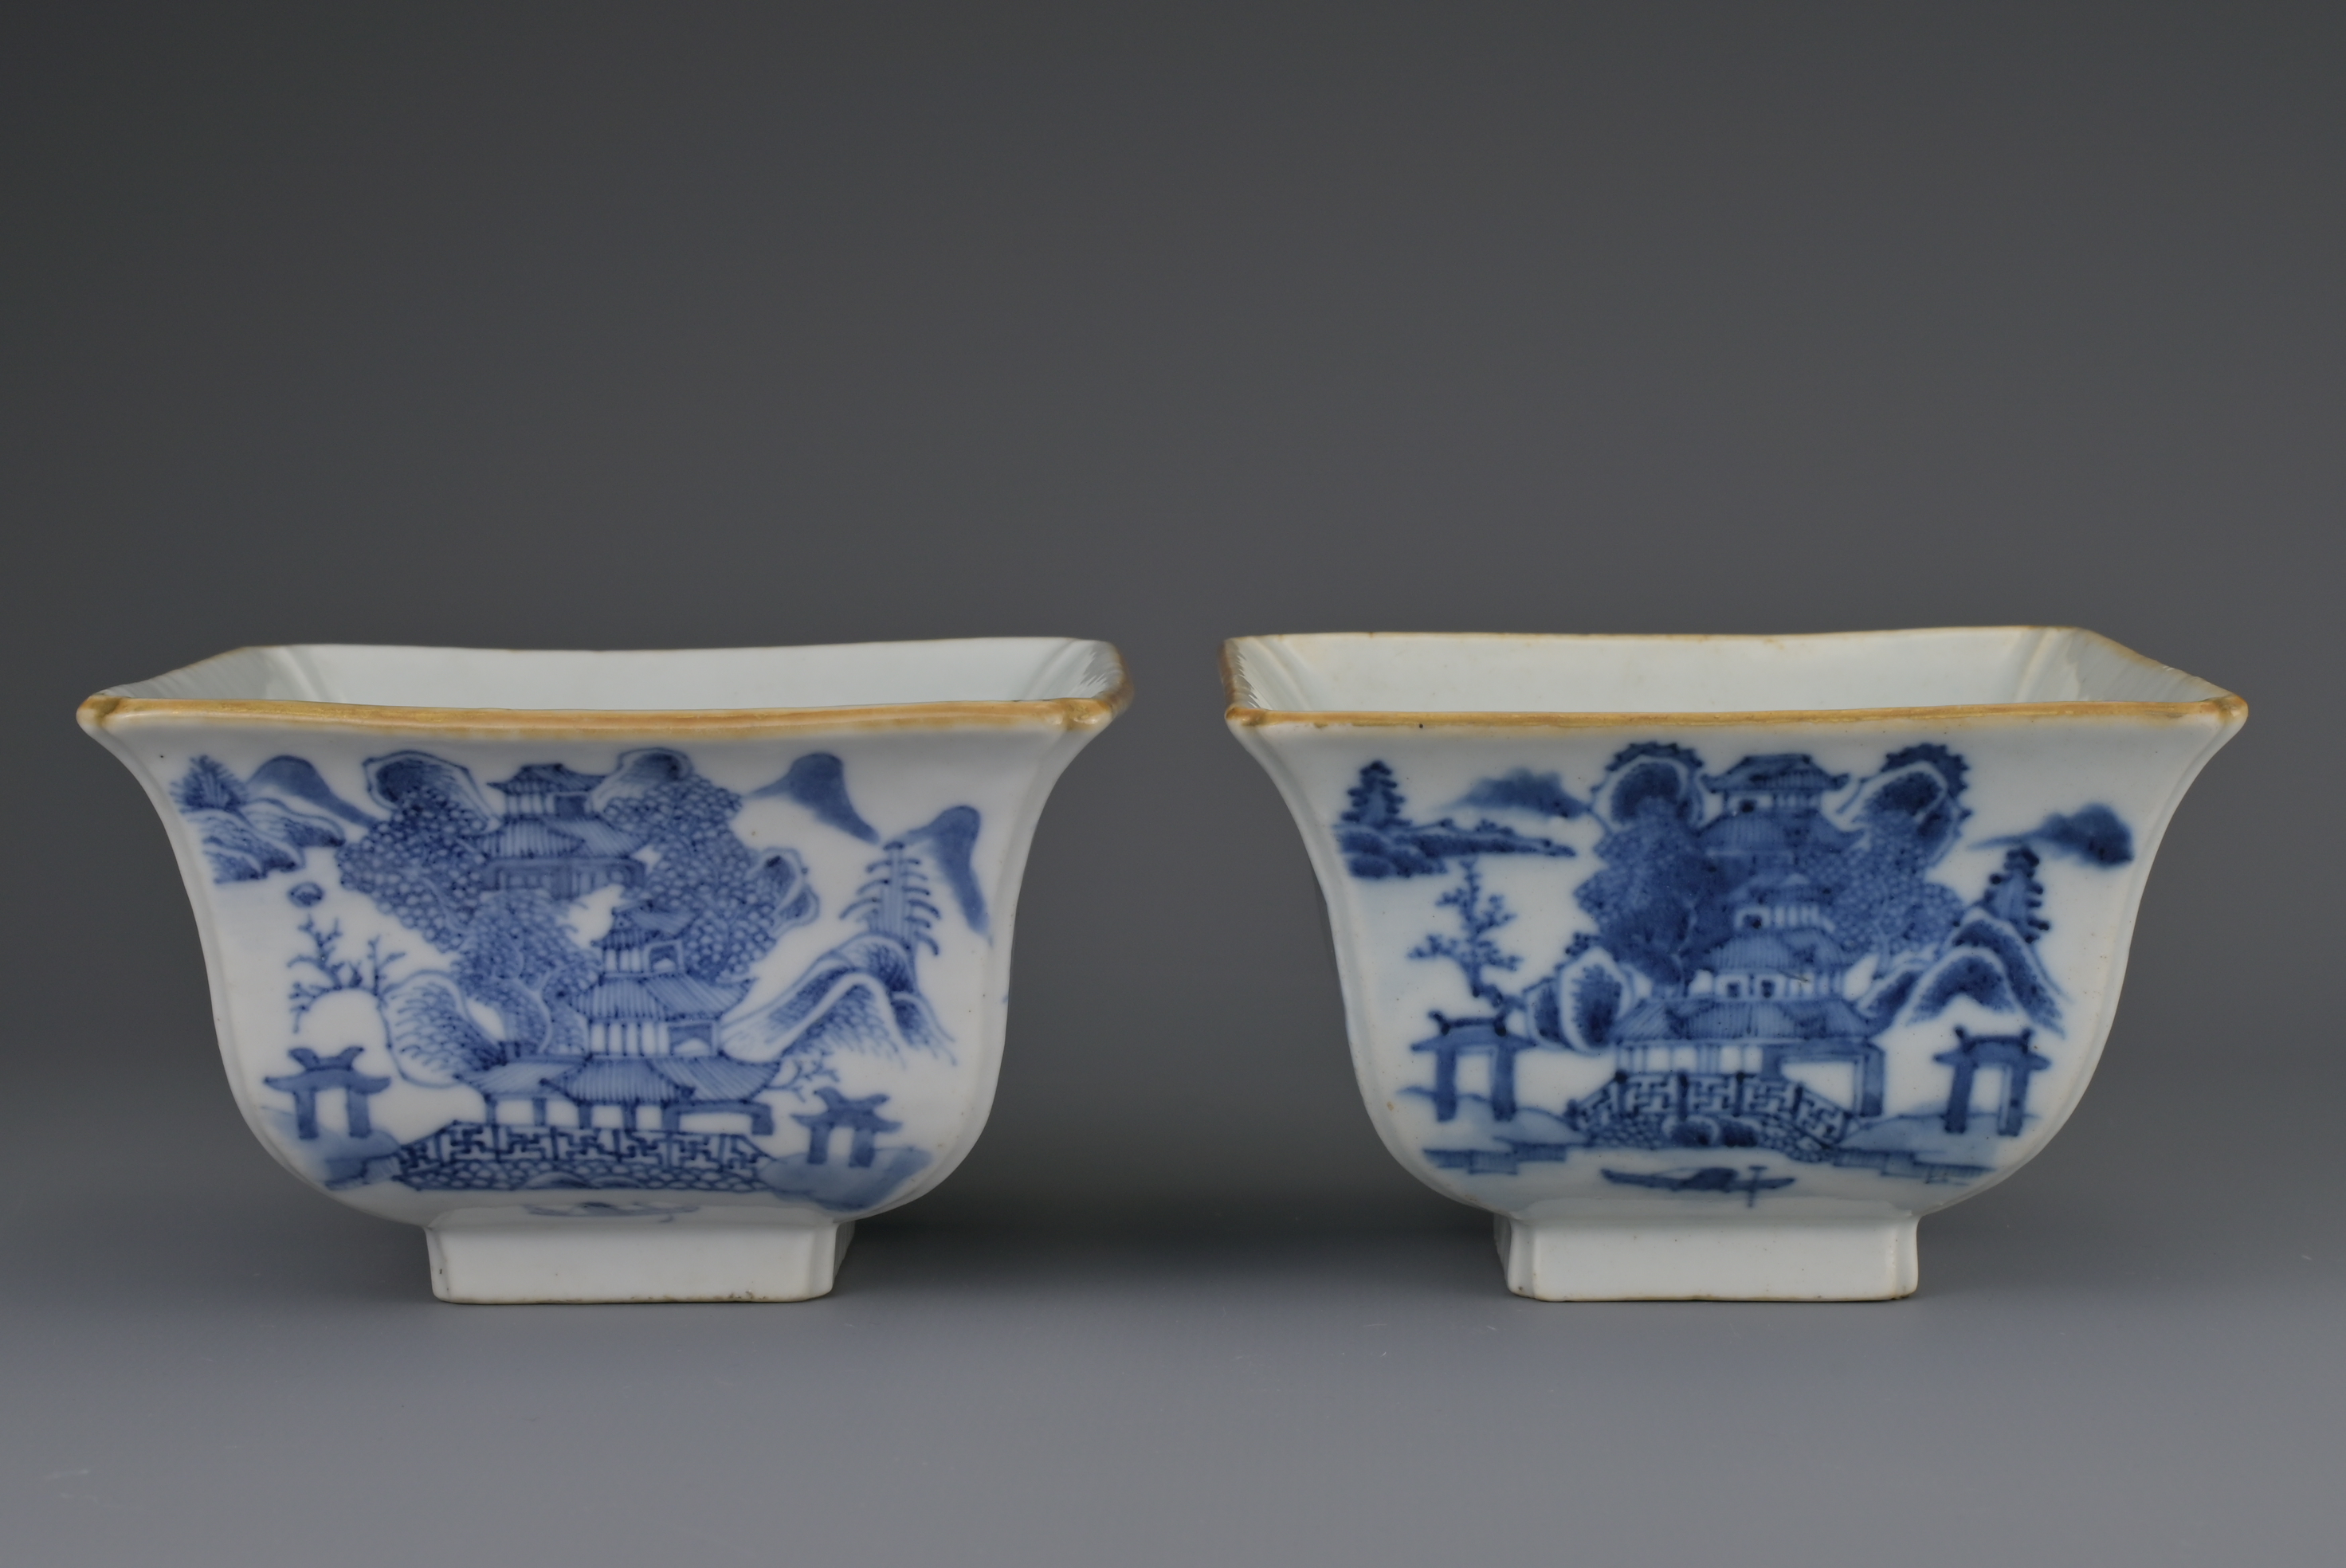 PAIR OF CHINESE BLUE AND WHITE PORCELAIN BOWLS, DAOGUANG MARK AND PERIOD, 19th CENTURY - Image 2 of 9